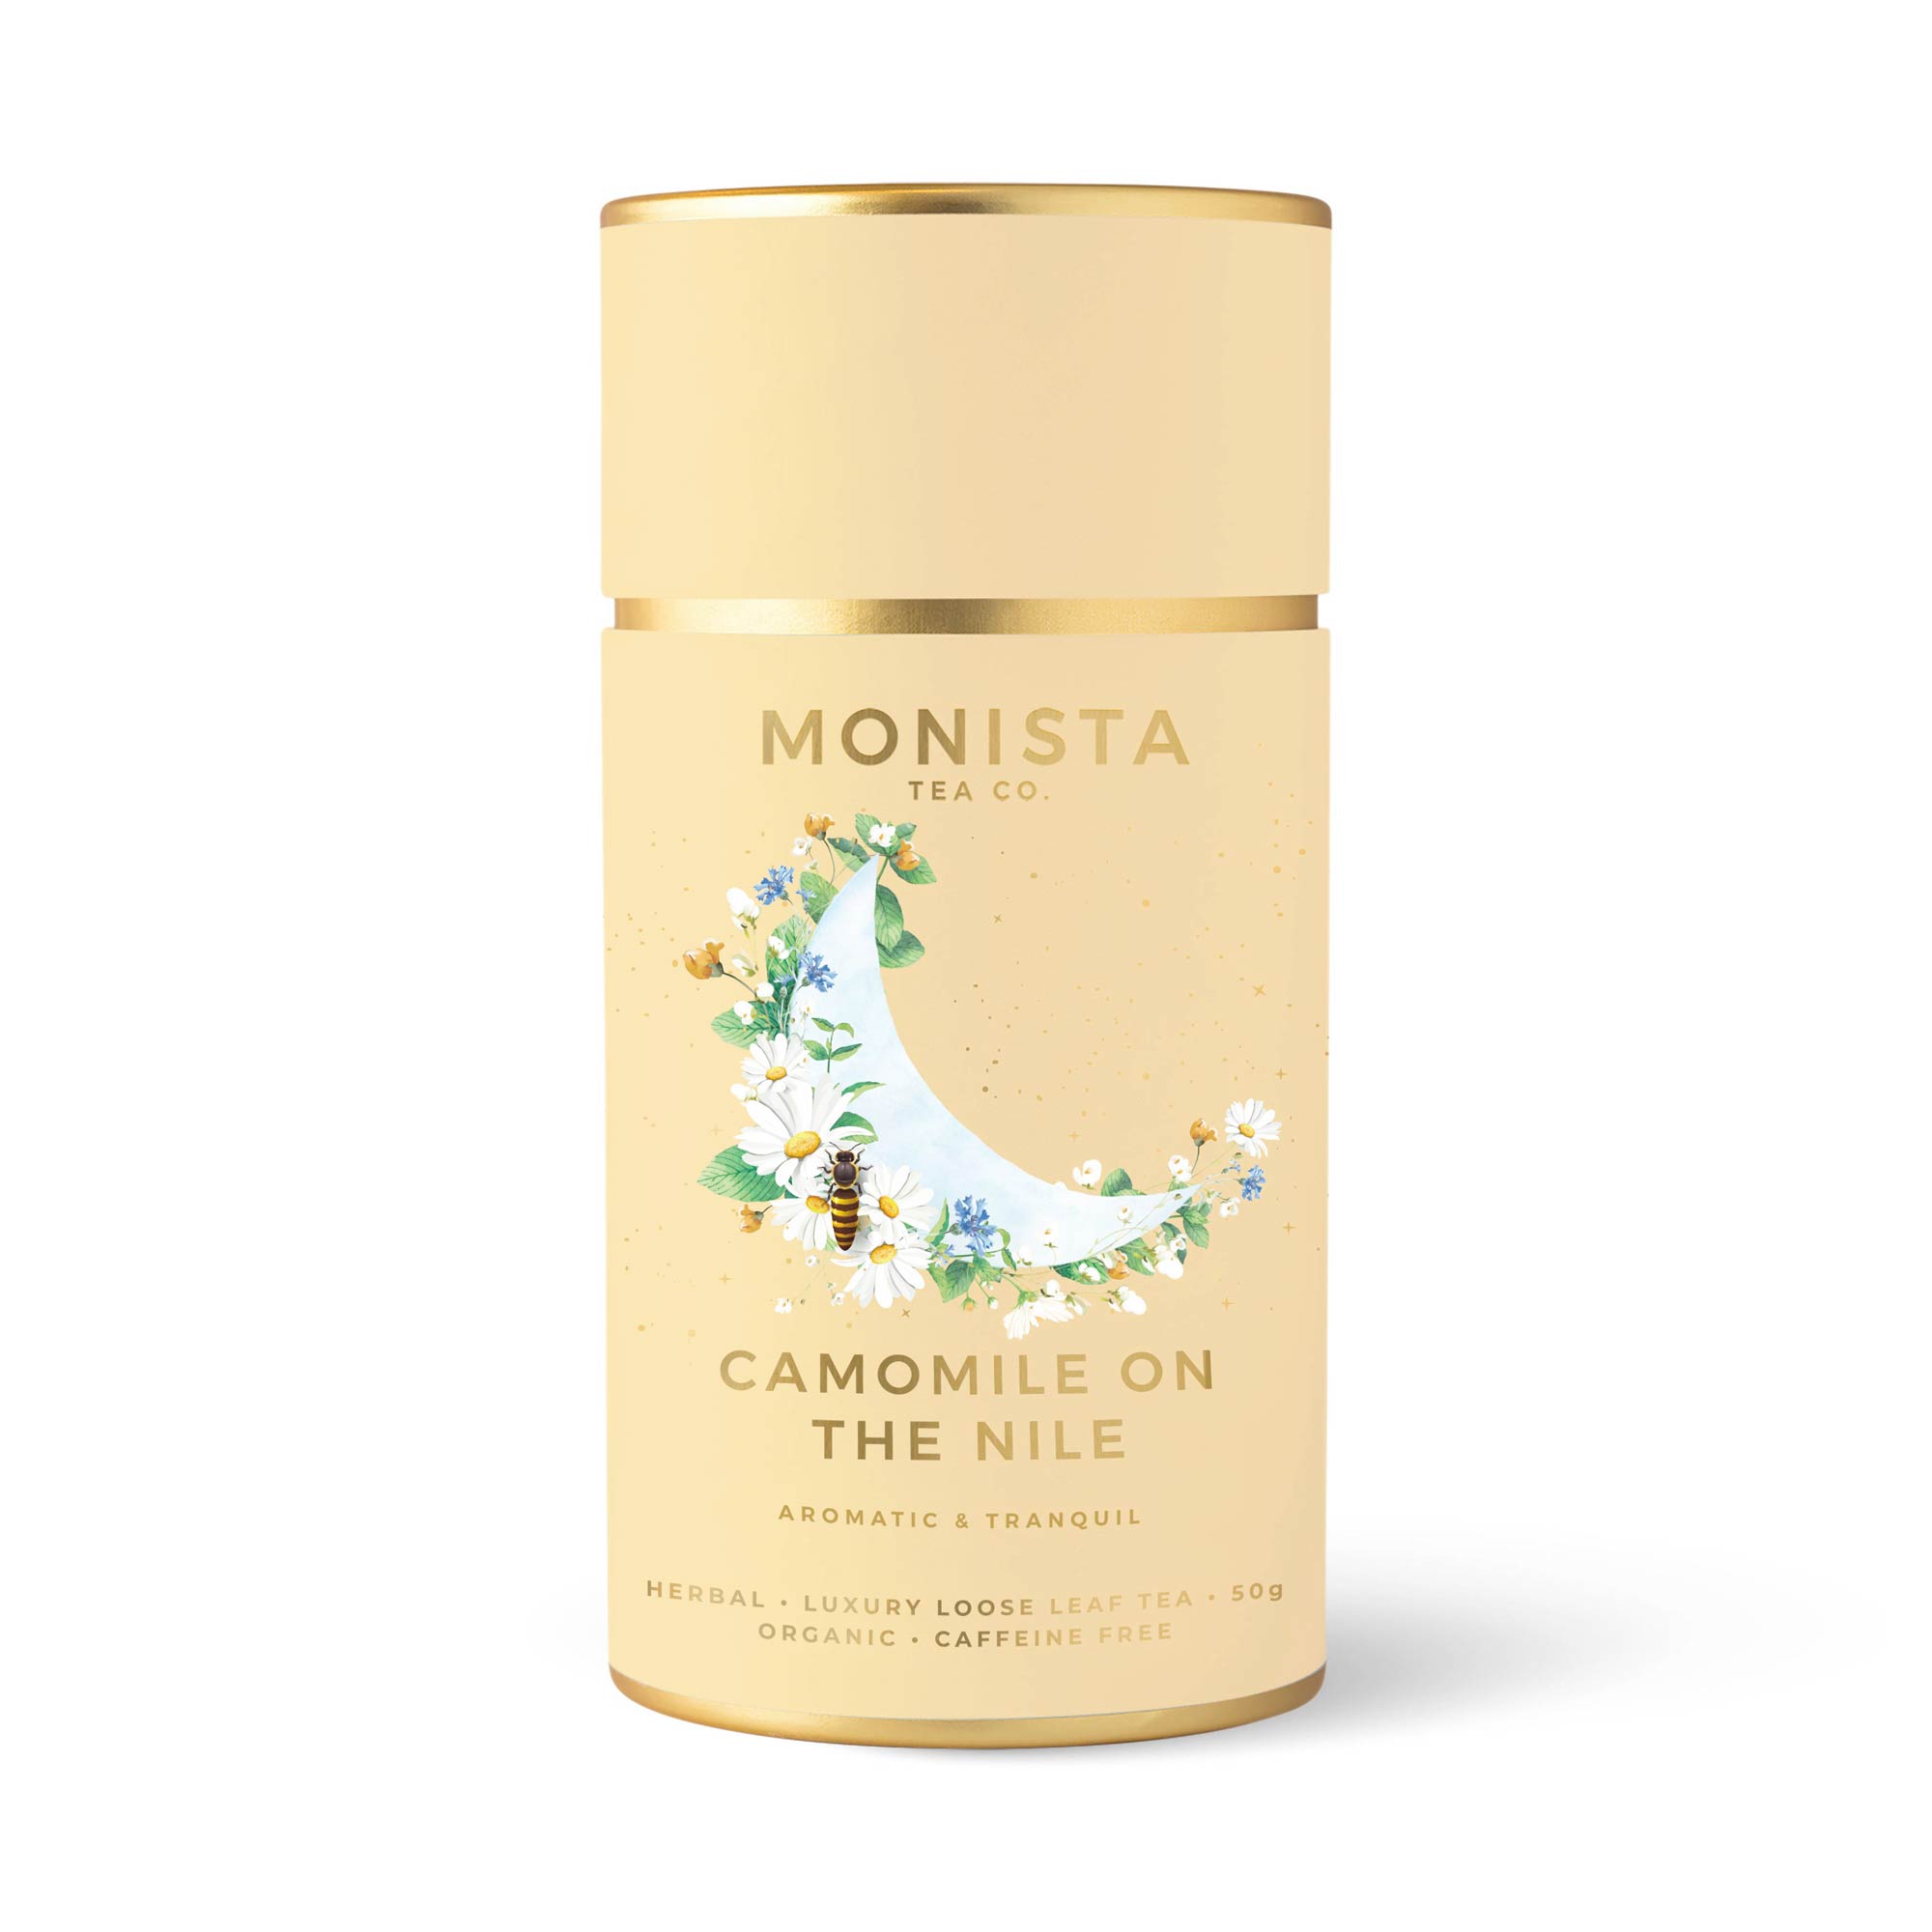 Yellow tea canister with picture of moon and flowers